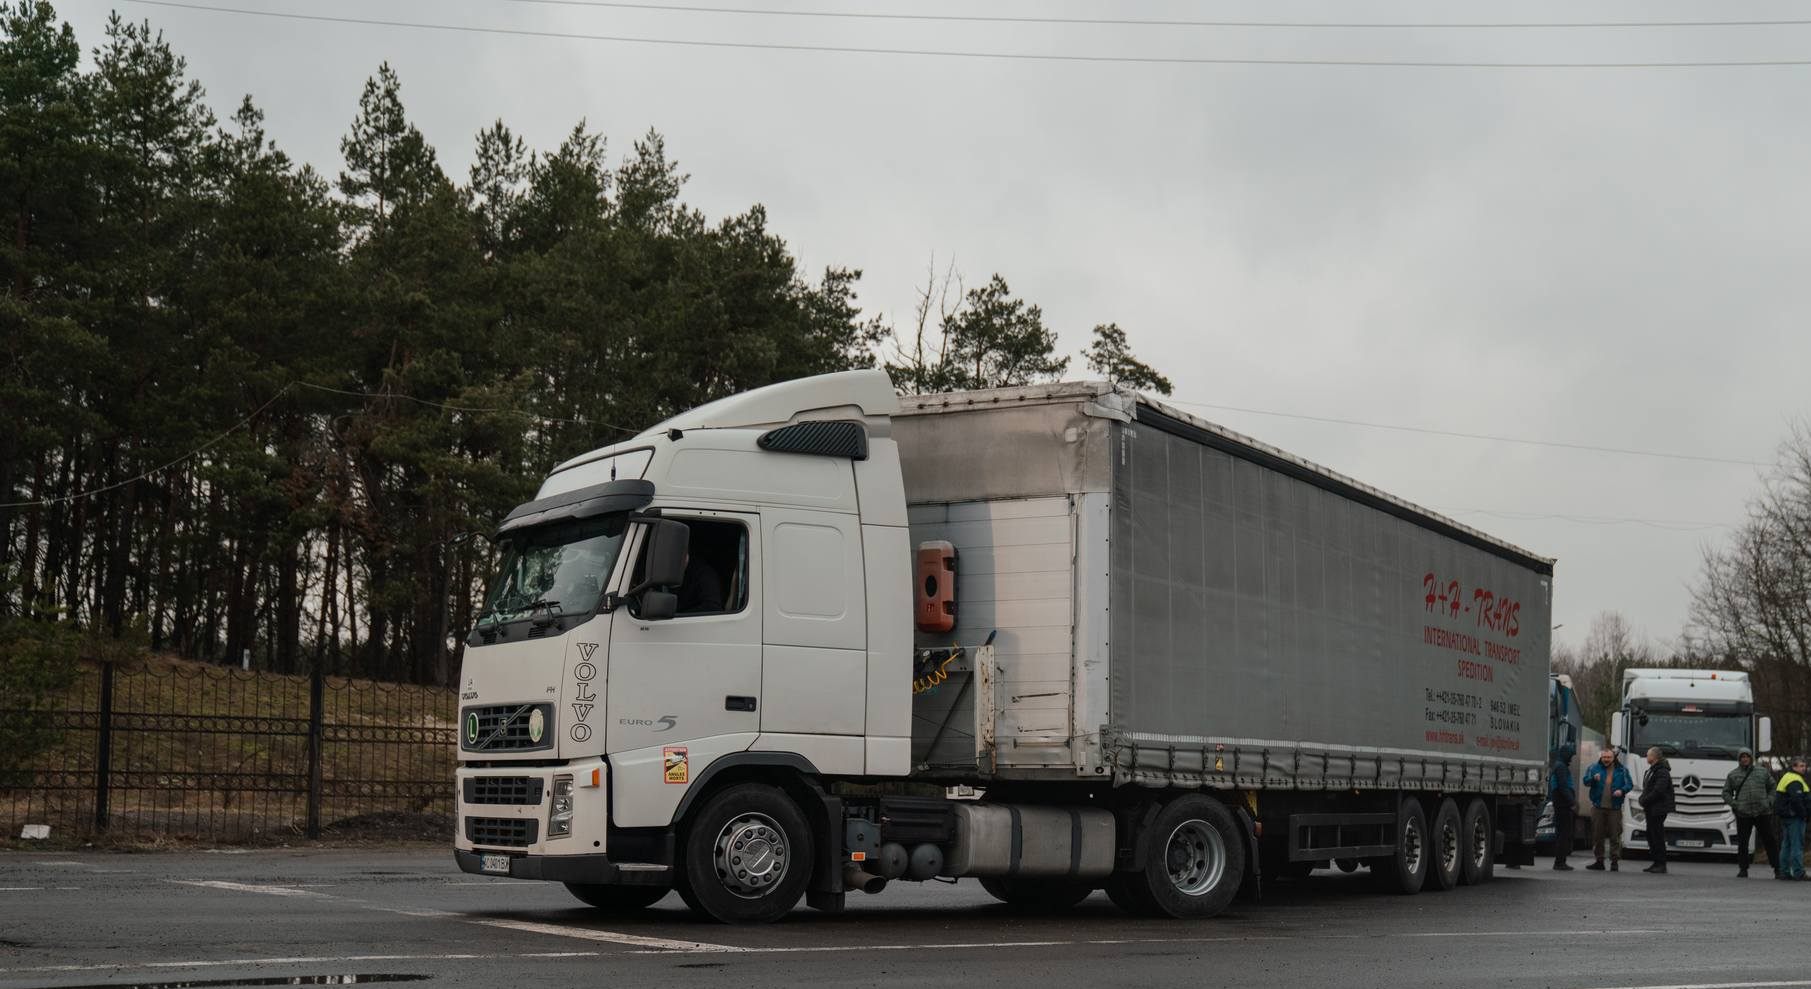 Ukraine and Poland have agreed - truck traffic across the border will resume without any permits